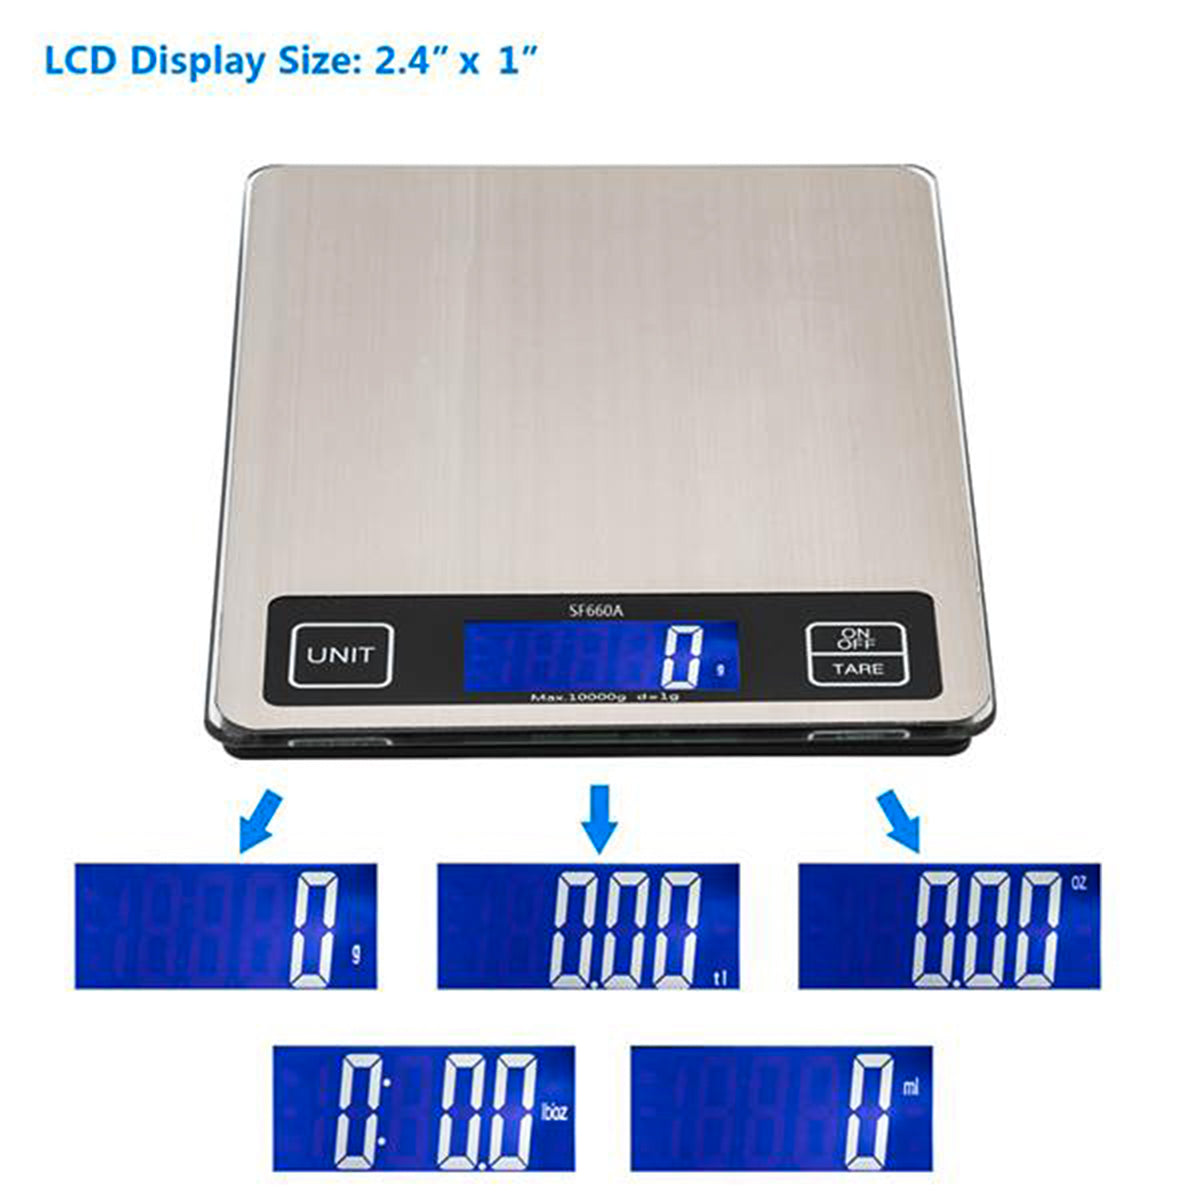 SUGIFT Food Scale, 22lb Digital Kitchen Stainless Steel Scale Weight G